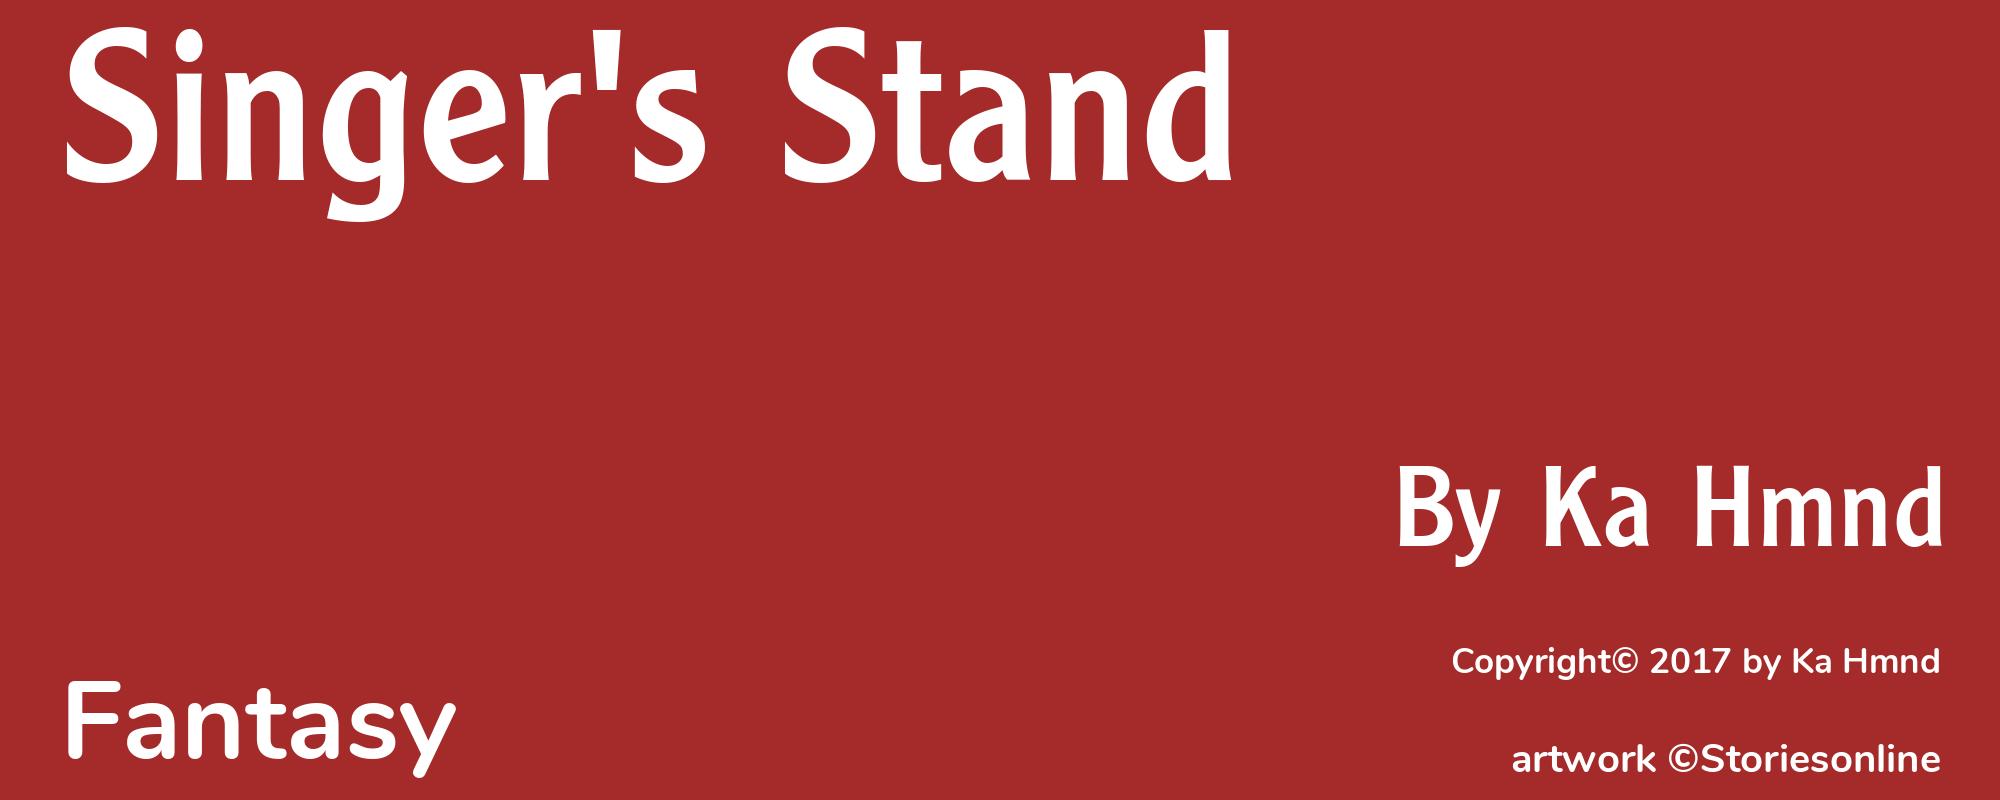 Singer's Stand - Cover